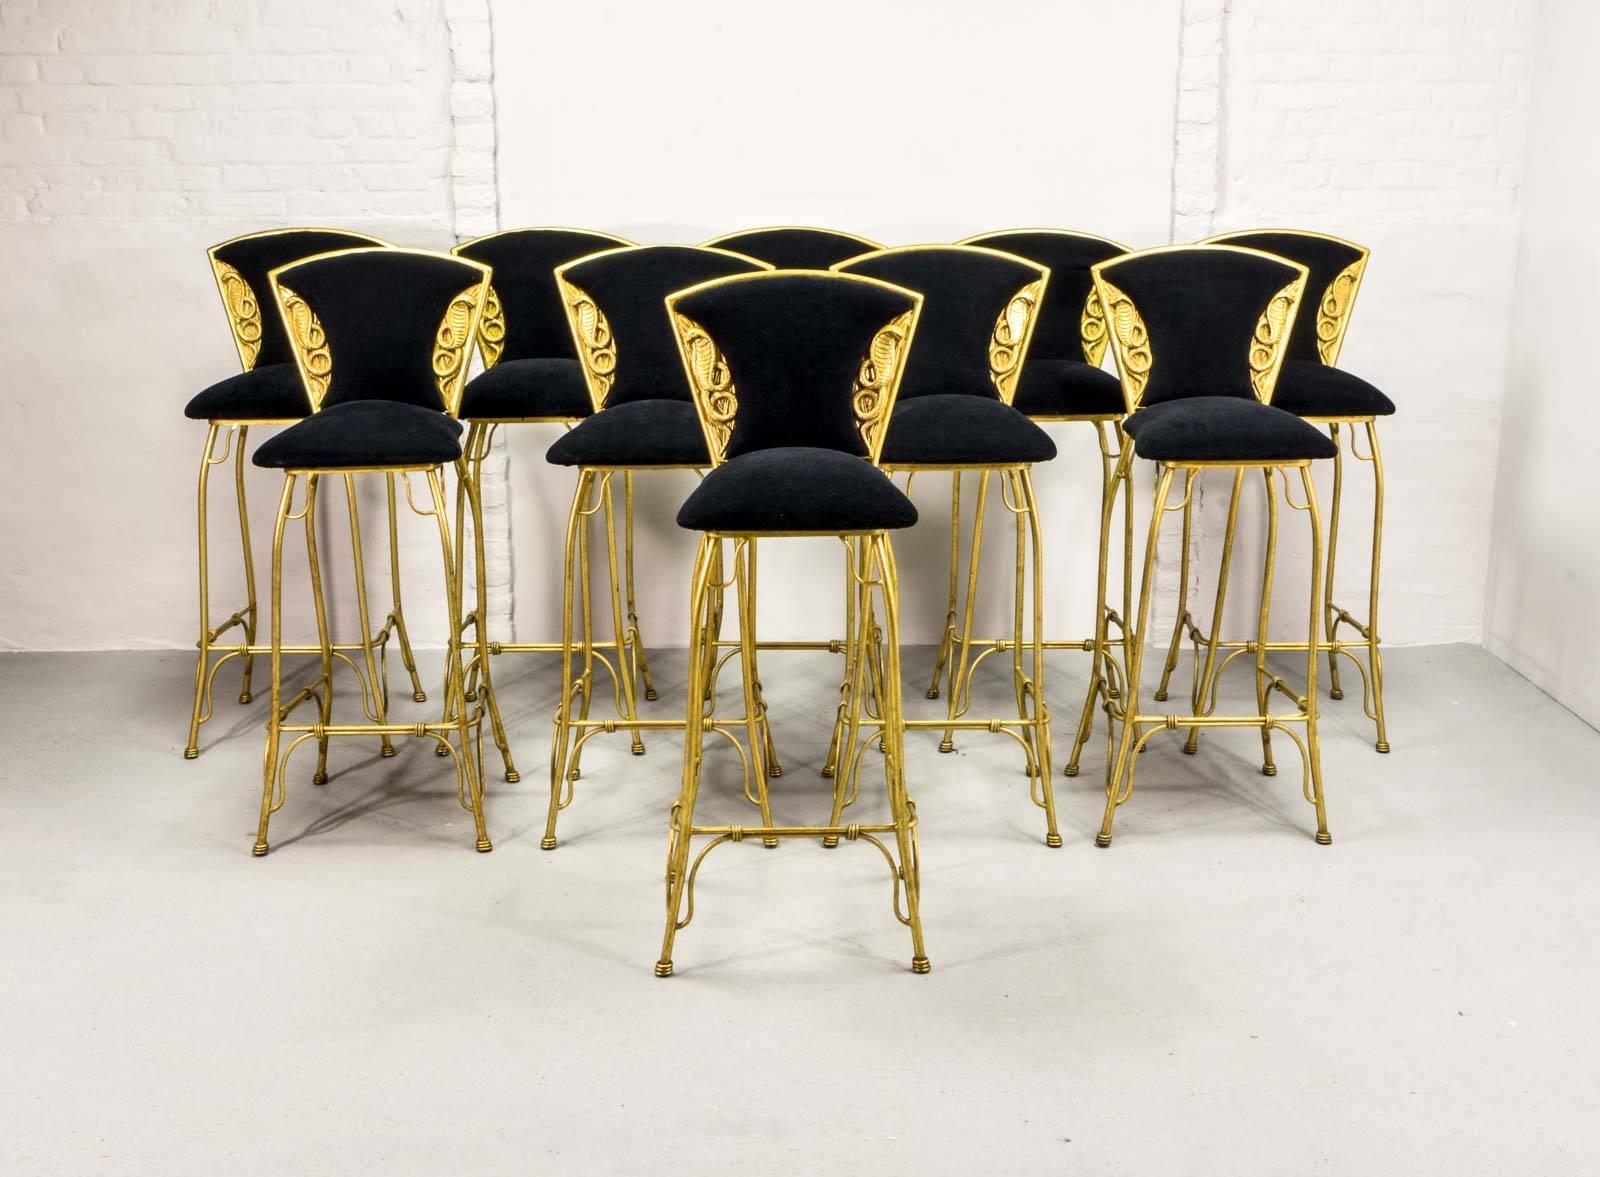 Beautiful set of ten gilded cobra barstools upholstered in black fabric. The forged and gilded frames show great craftsmanship and the golden cobras are nicely sculptured on the front and backside of the backrest. These very well preserved and